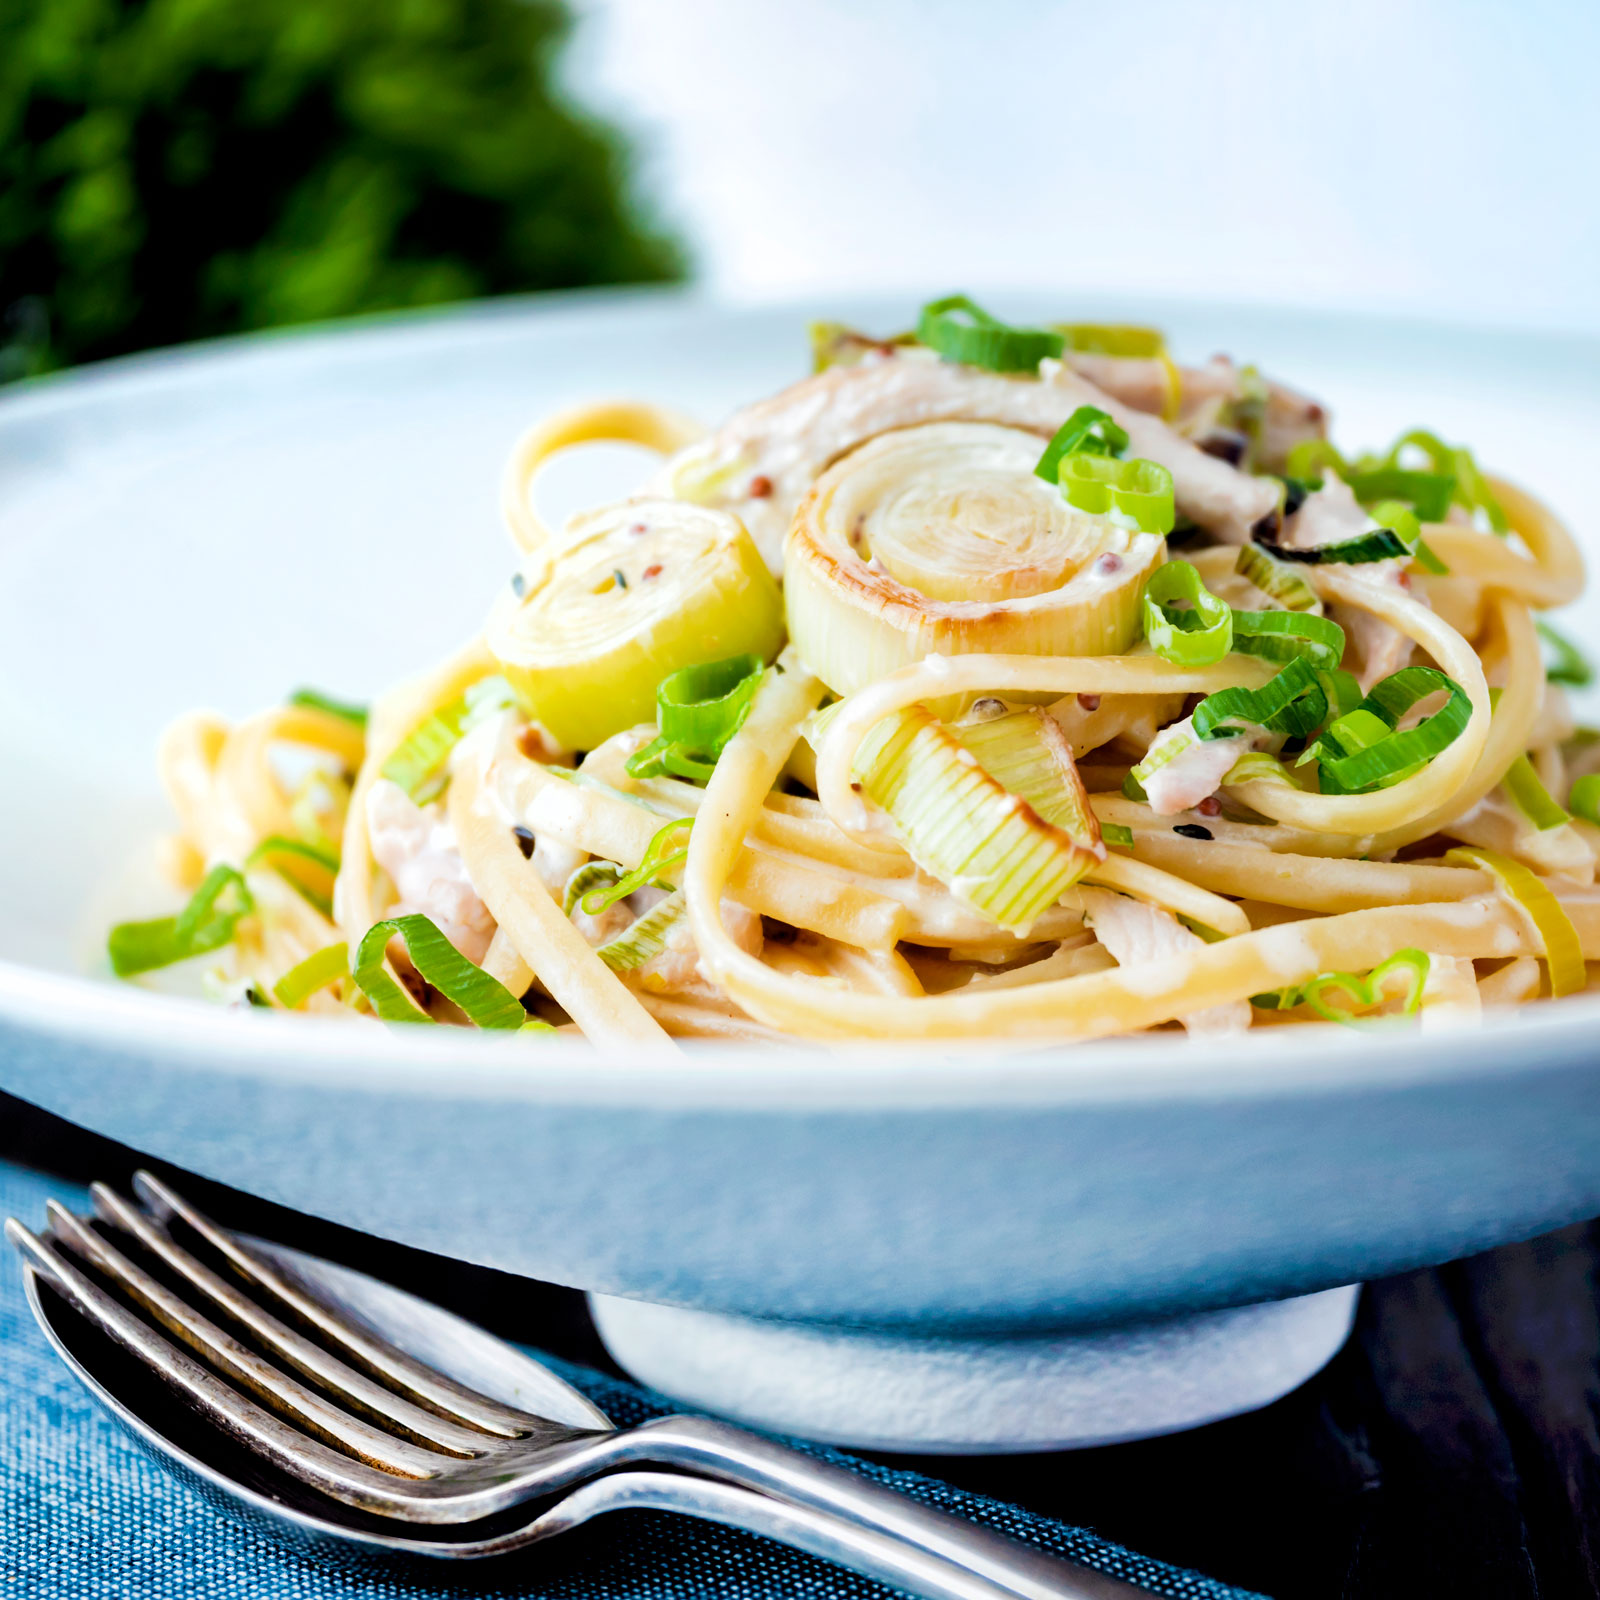 Chicken and leek pasta with linguini and shredded spring onions.